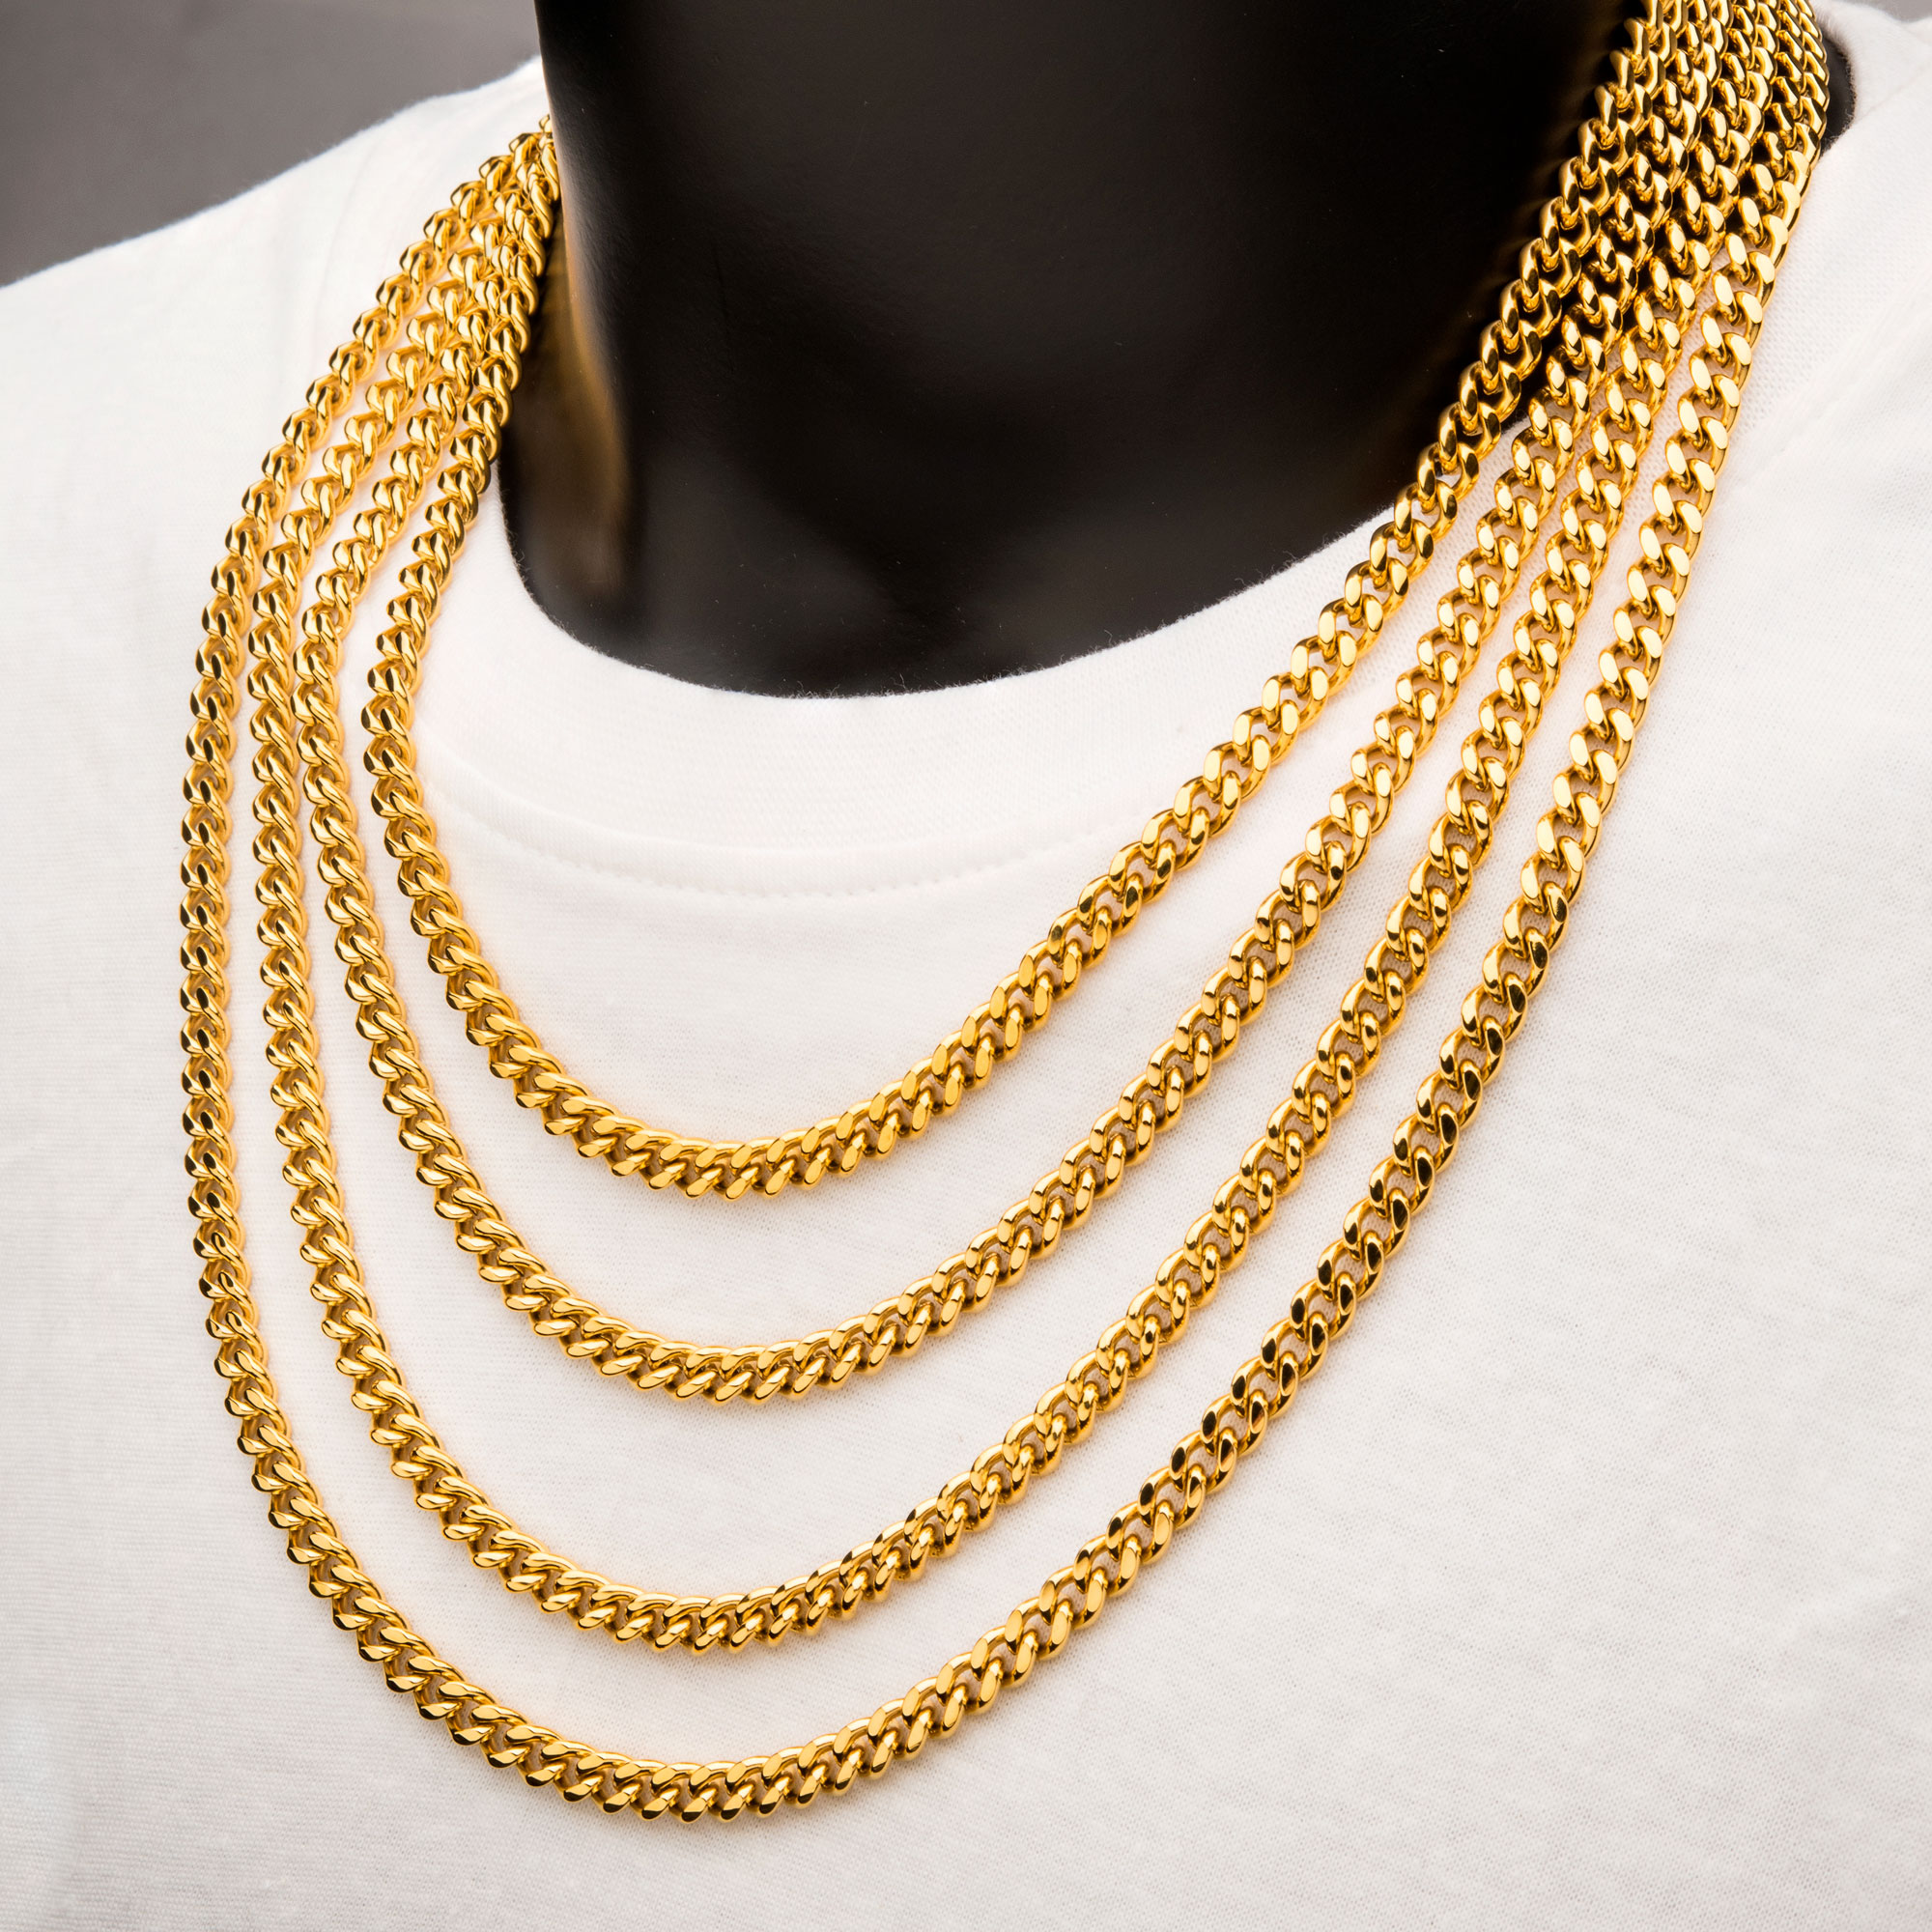 18K Gold Plated Curb Chain Necklace Image 3 Morin Jewelers Southbridge, MA